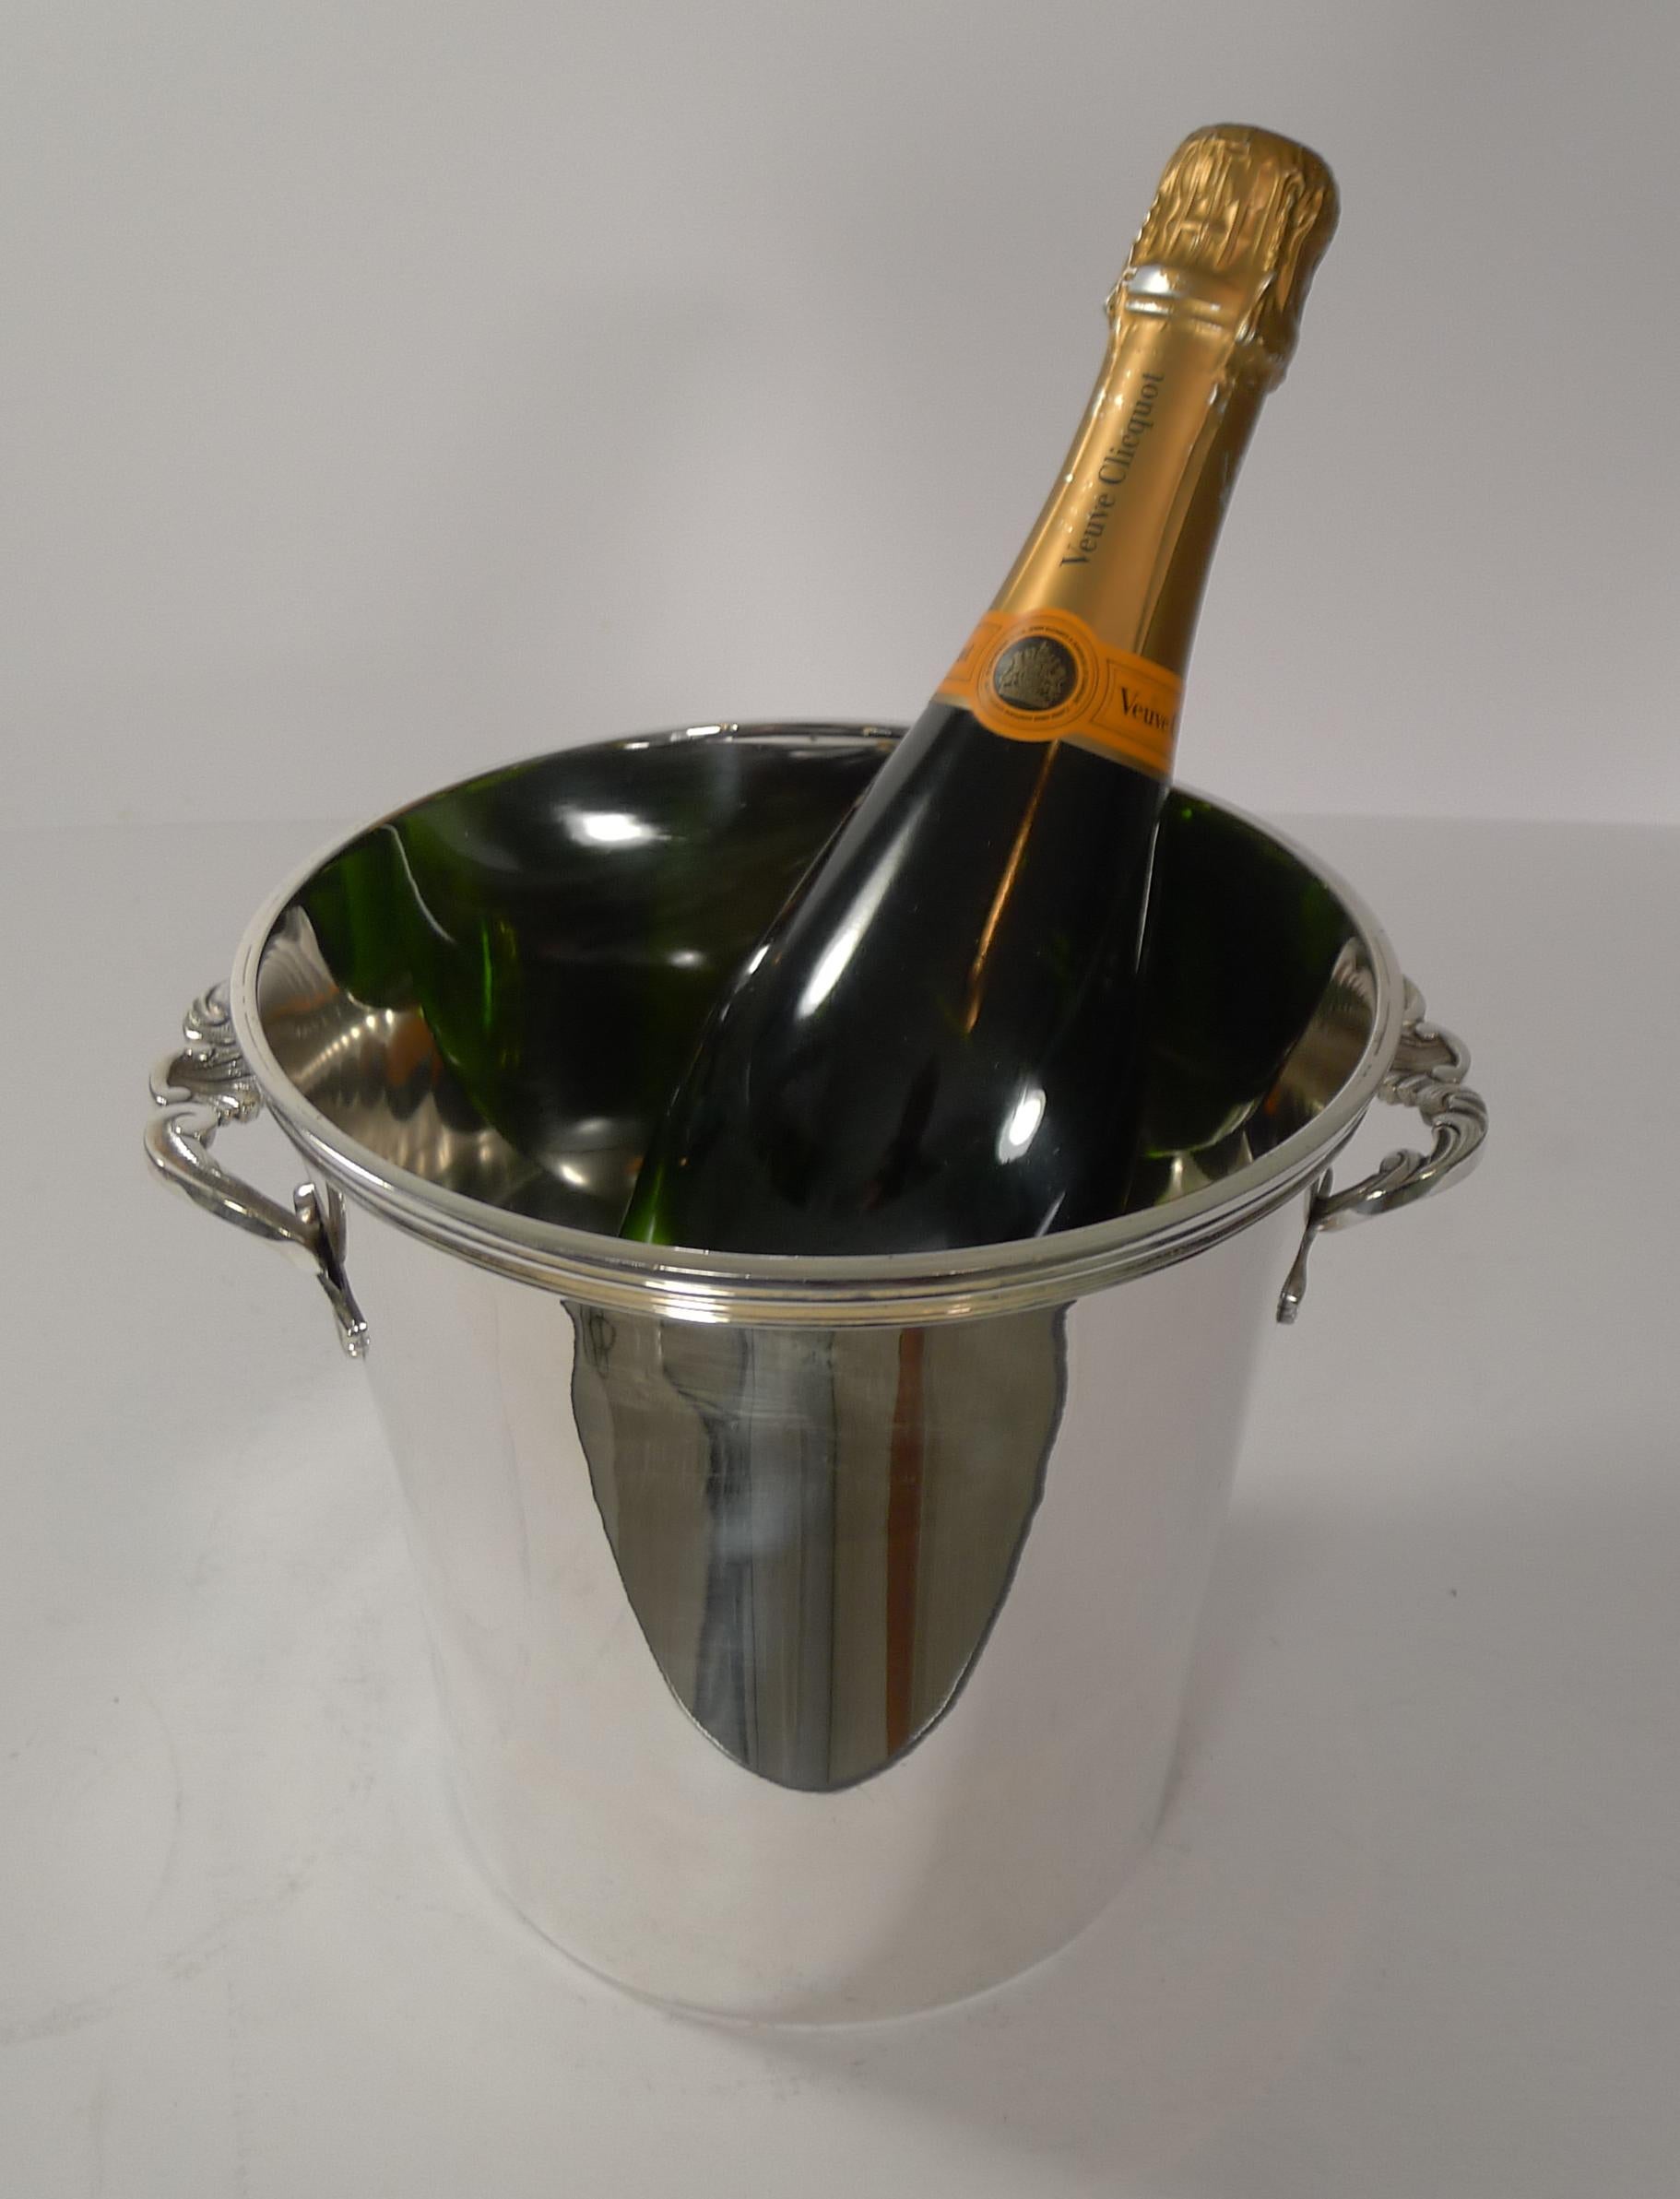 Vintage French Silver Plated Champagne Bucket / Wine Cooler 1